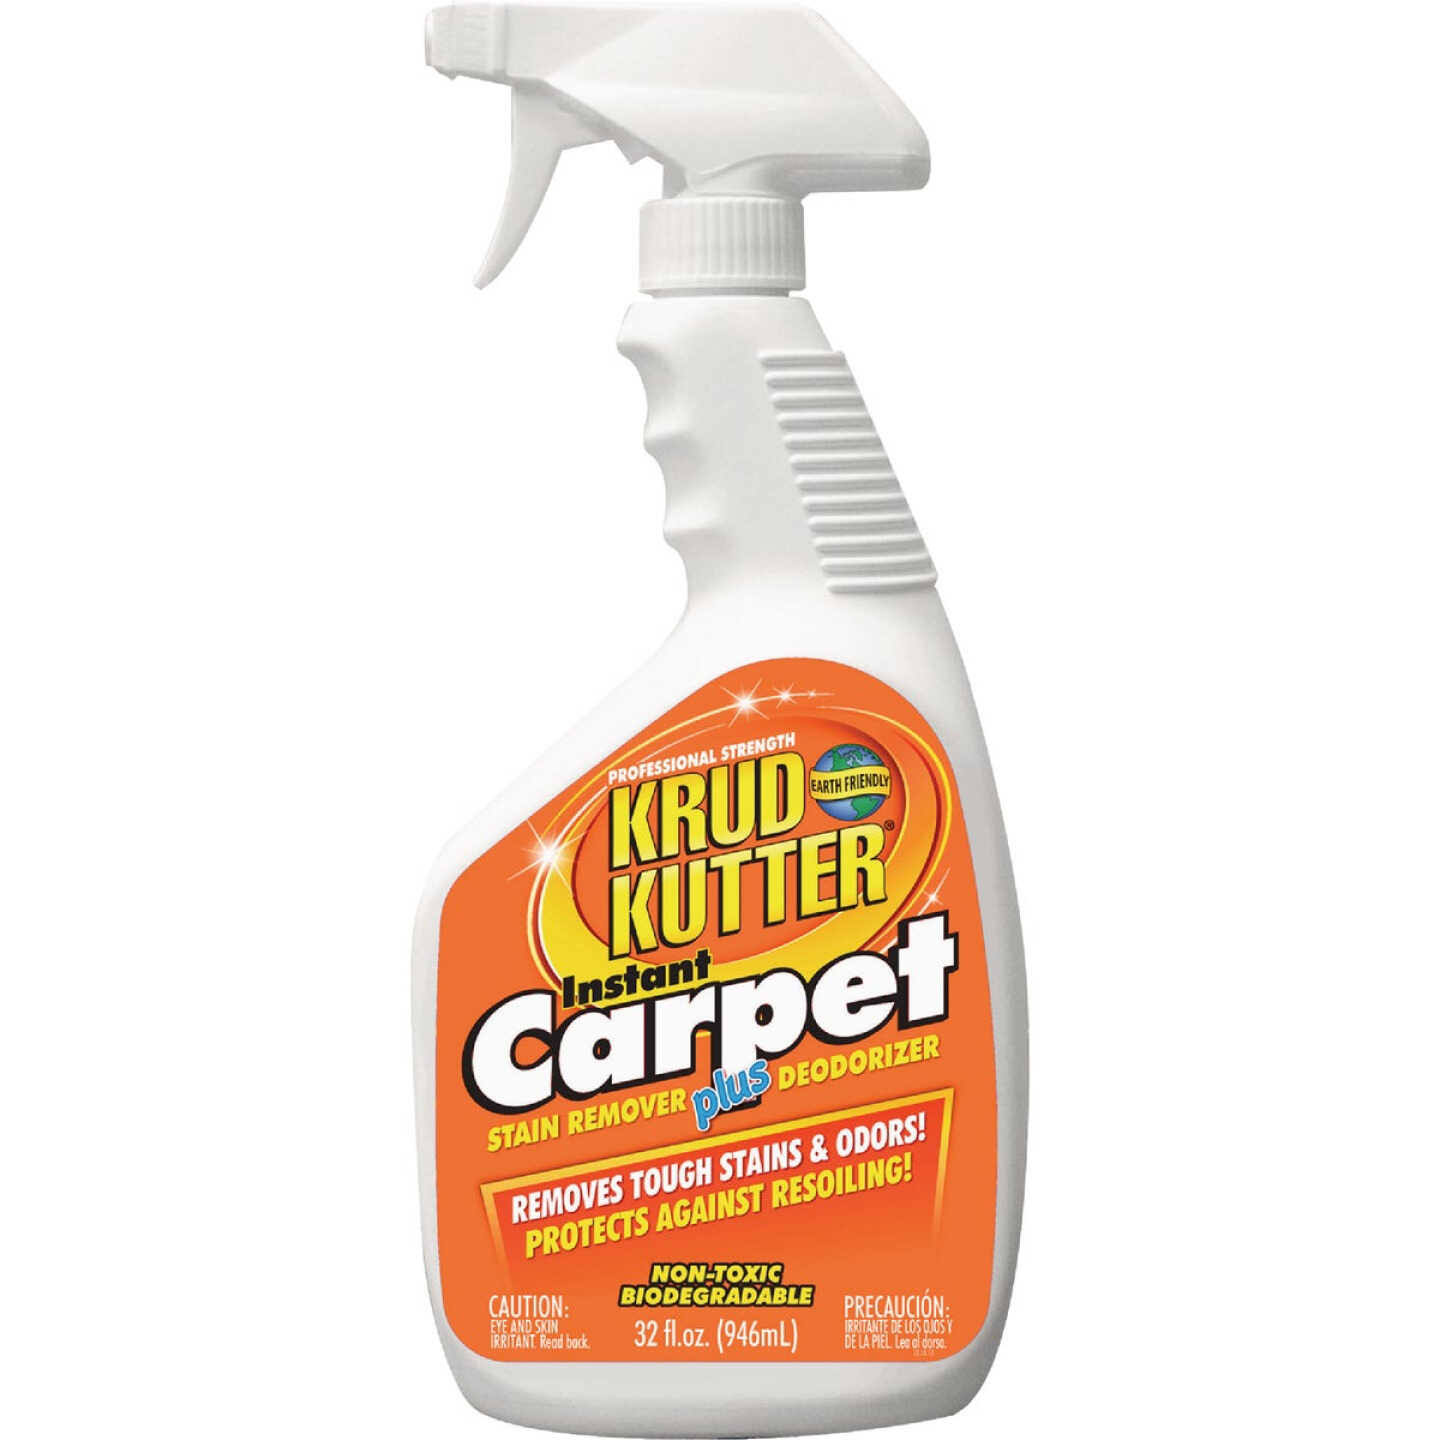 Krud Kutter Carpet Cleaner and Stain Remover - 32oz